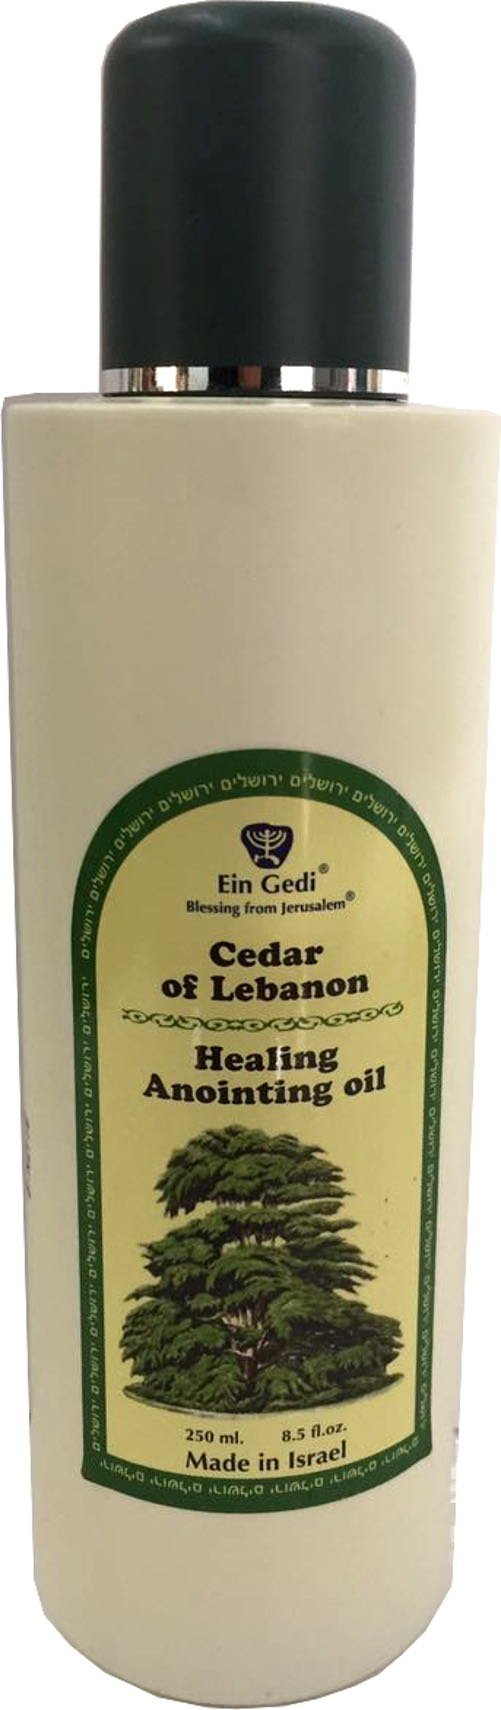 Holy Land Market Cedar Lebanon anointing Oil from Ein Gedi large size - Anointing oil - 250 ml (8.5 fl. oz.)